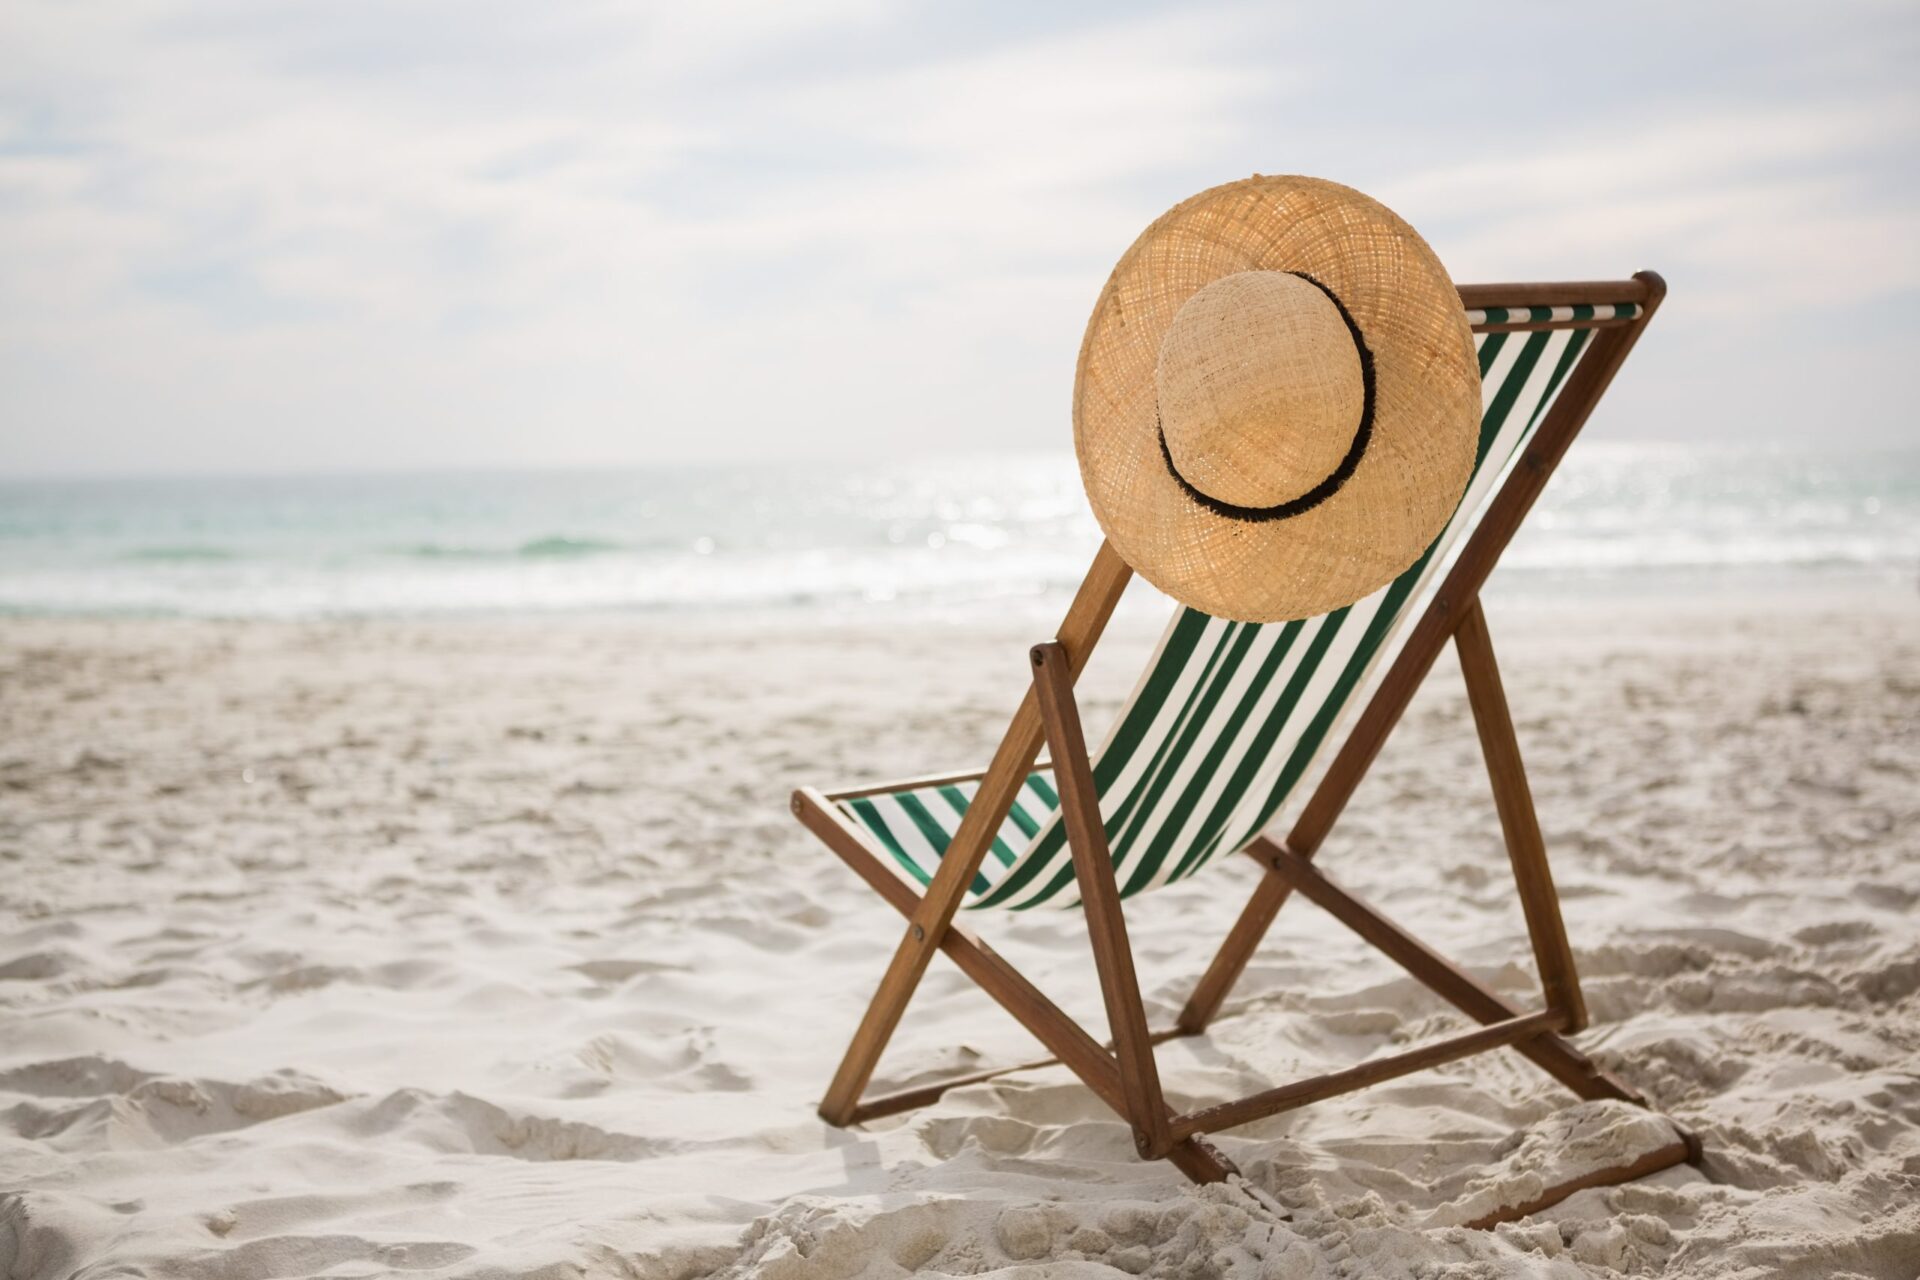 straw hat kept on empty beach chair scaled - Bonnes vacances !